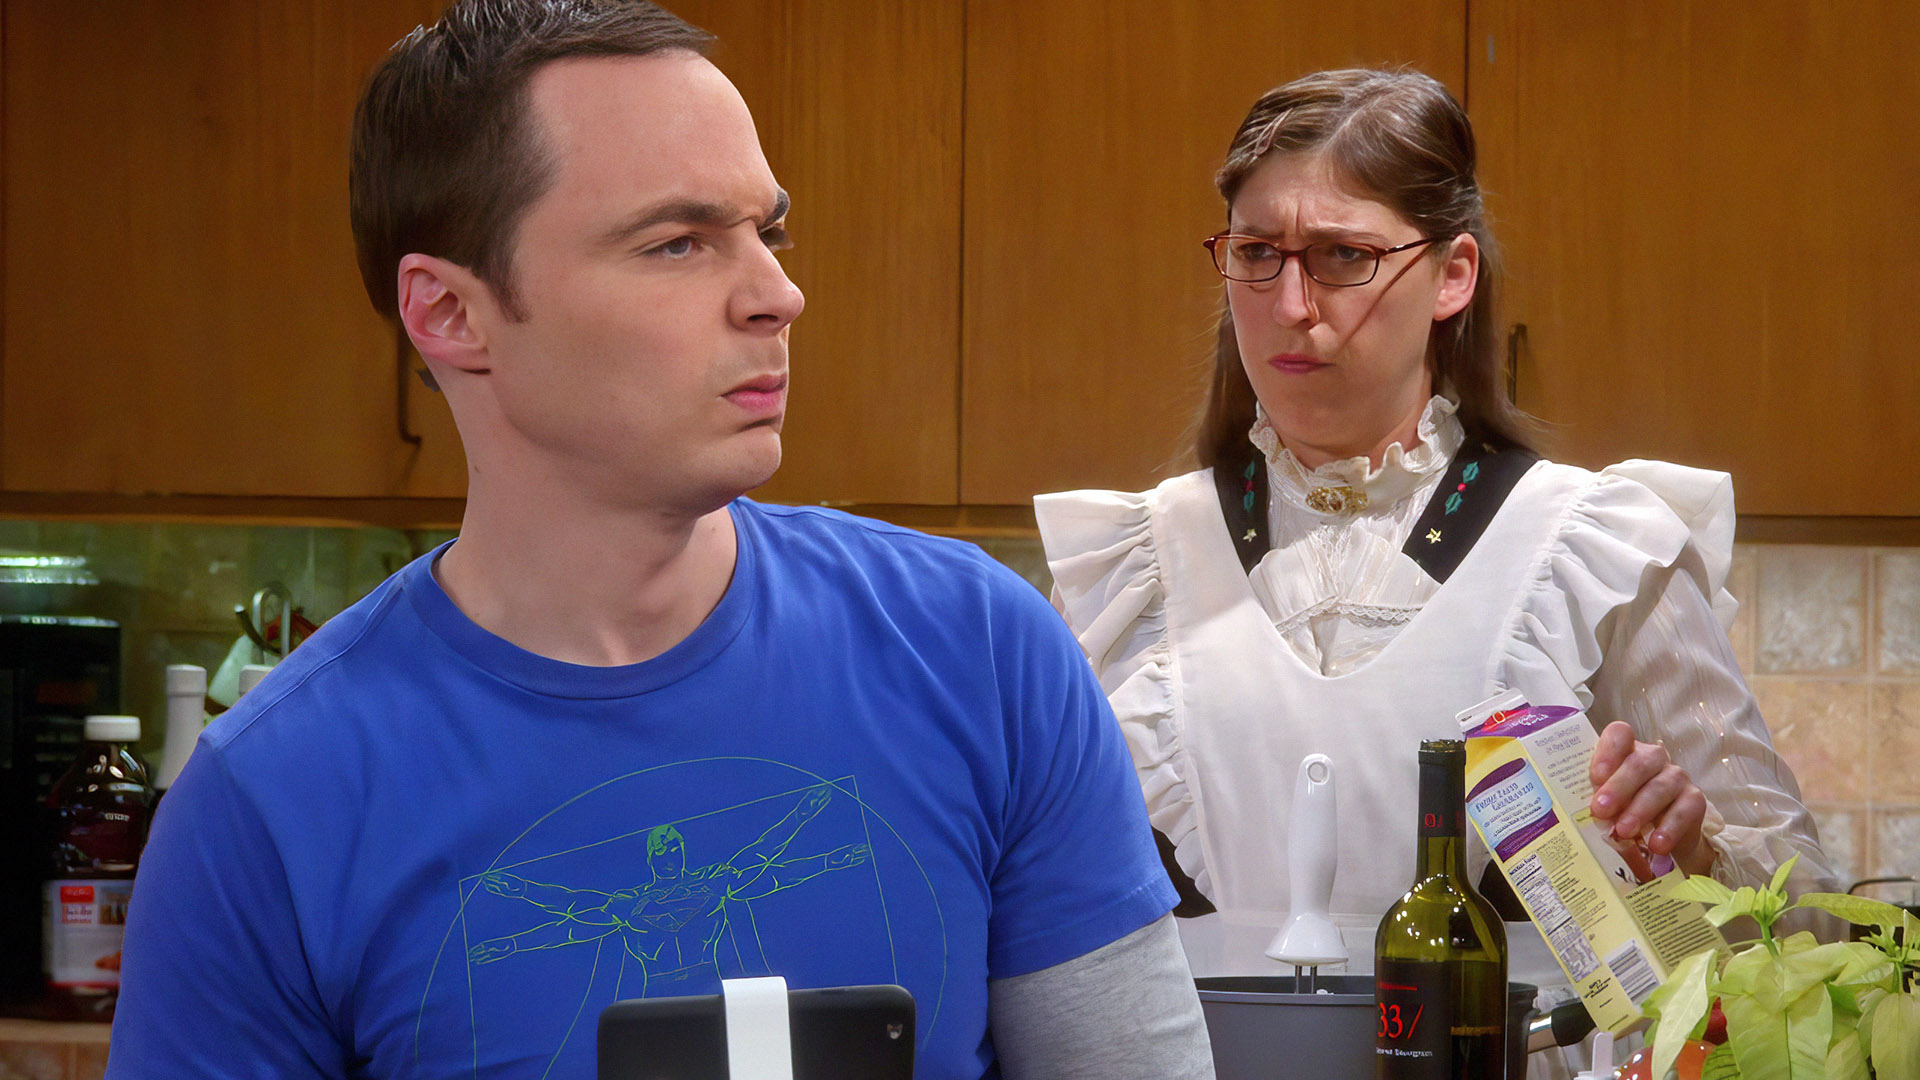 7 Most Memorable Guest Stars Who Appeared on The Big Bang Theory